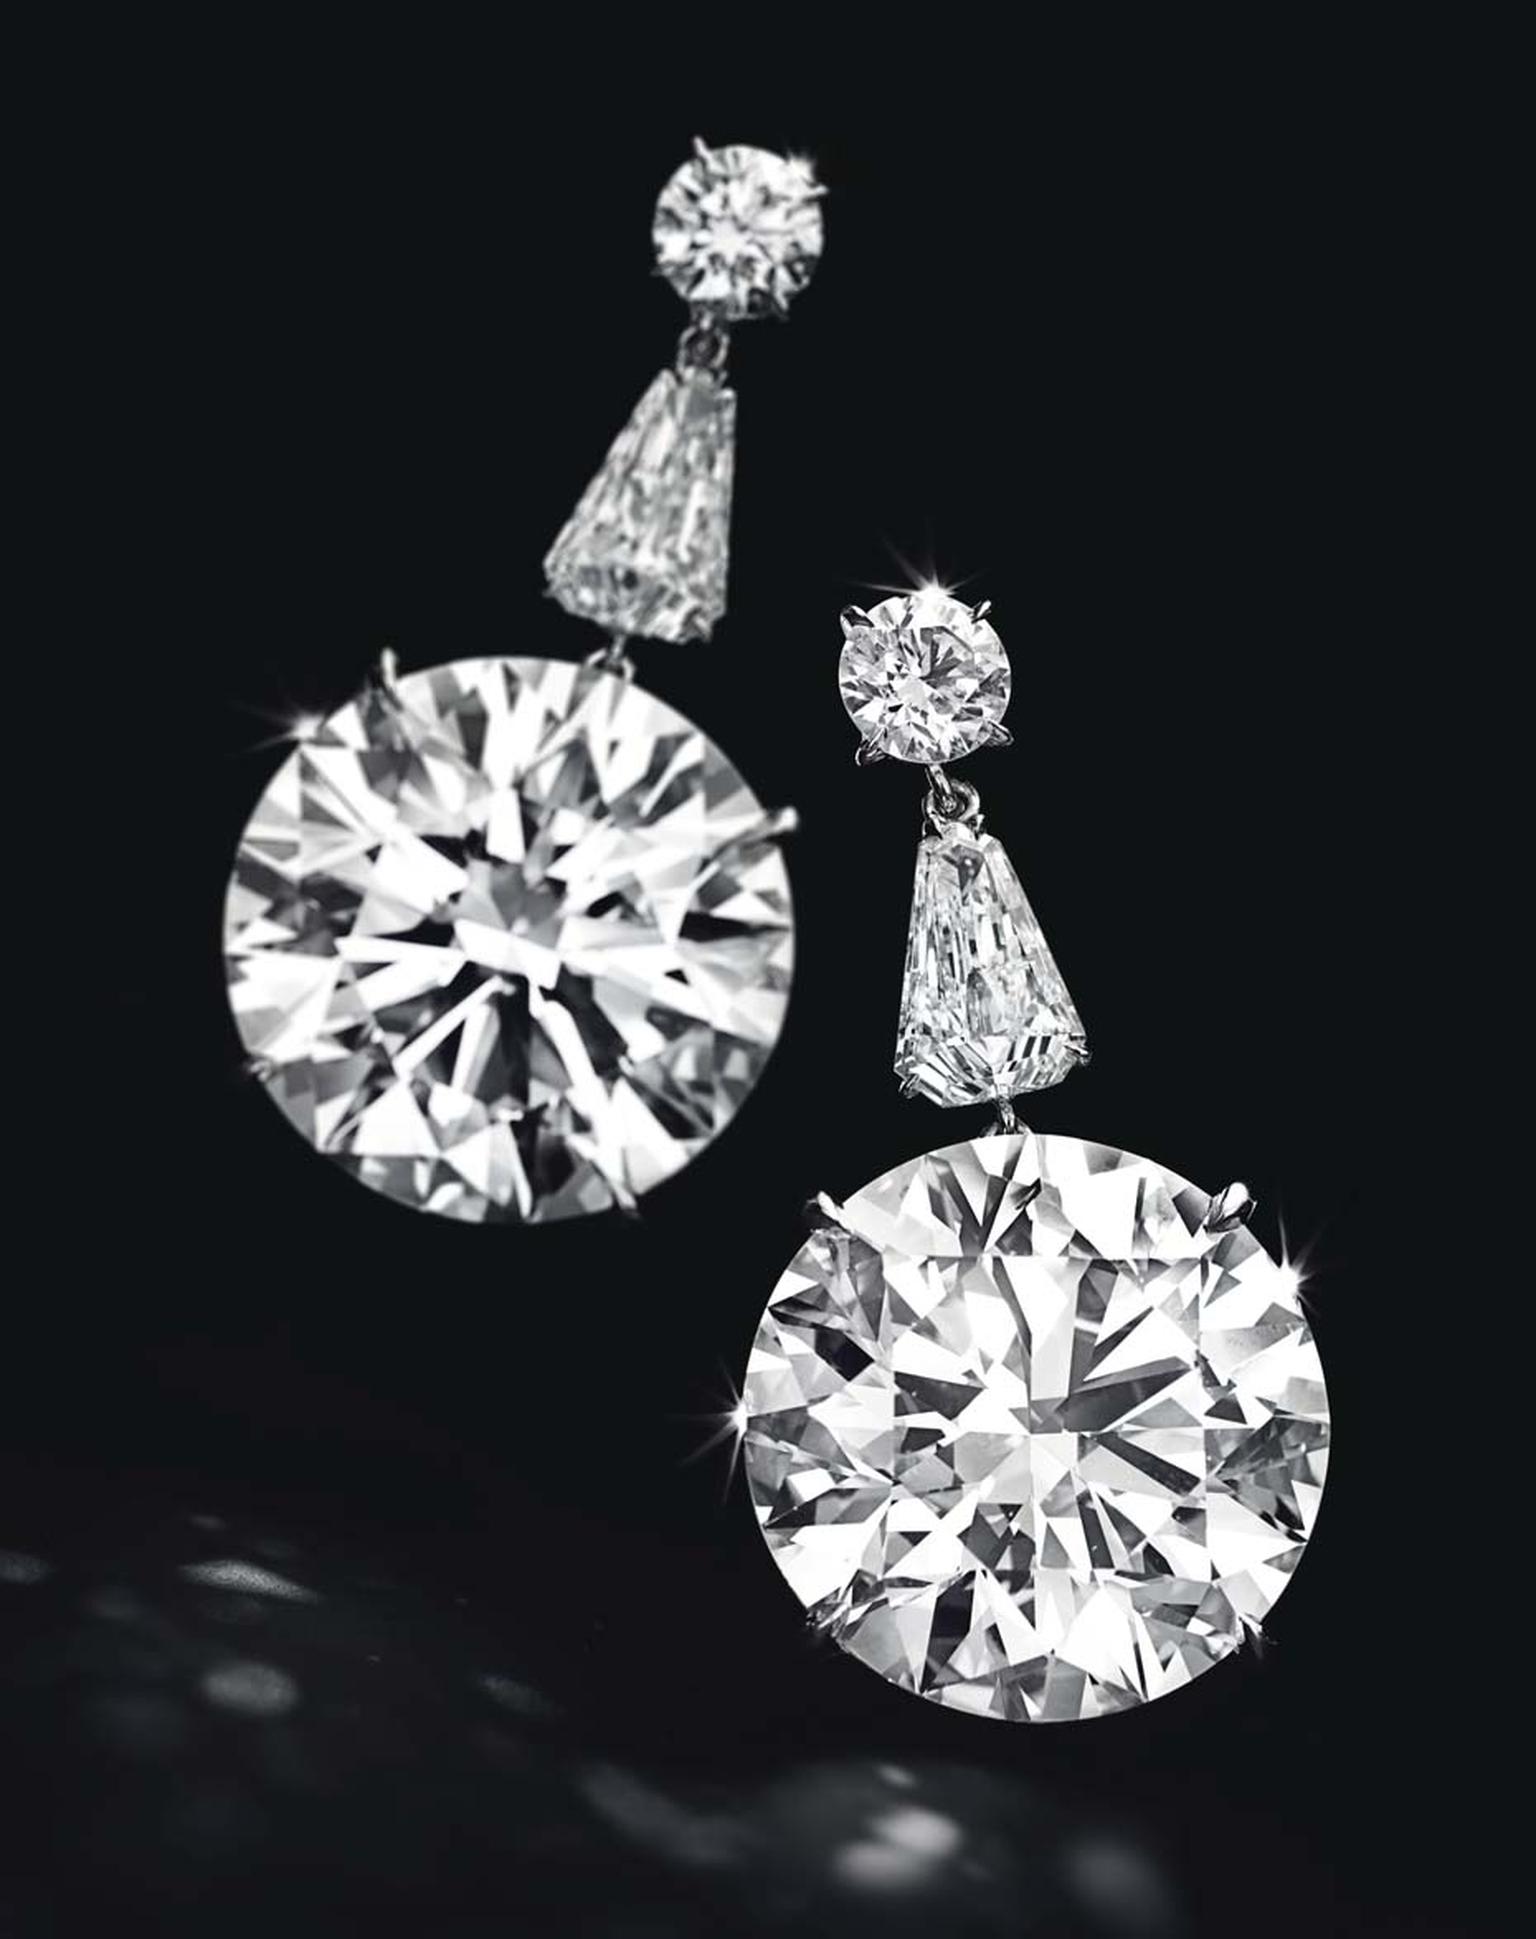 Lot 255, a sensational pair of diamond ear pendants, each set with a circular-cut diamond weighing approximately 22.50 and 22.31ct, mounted in platinum (estimate: US$7-10 million)